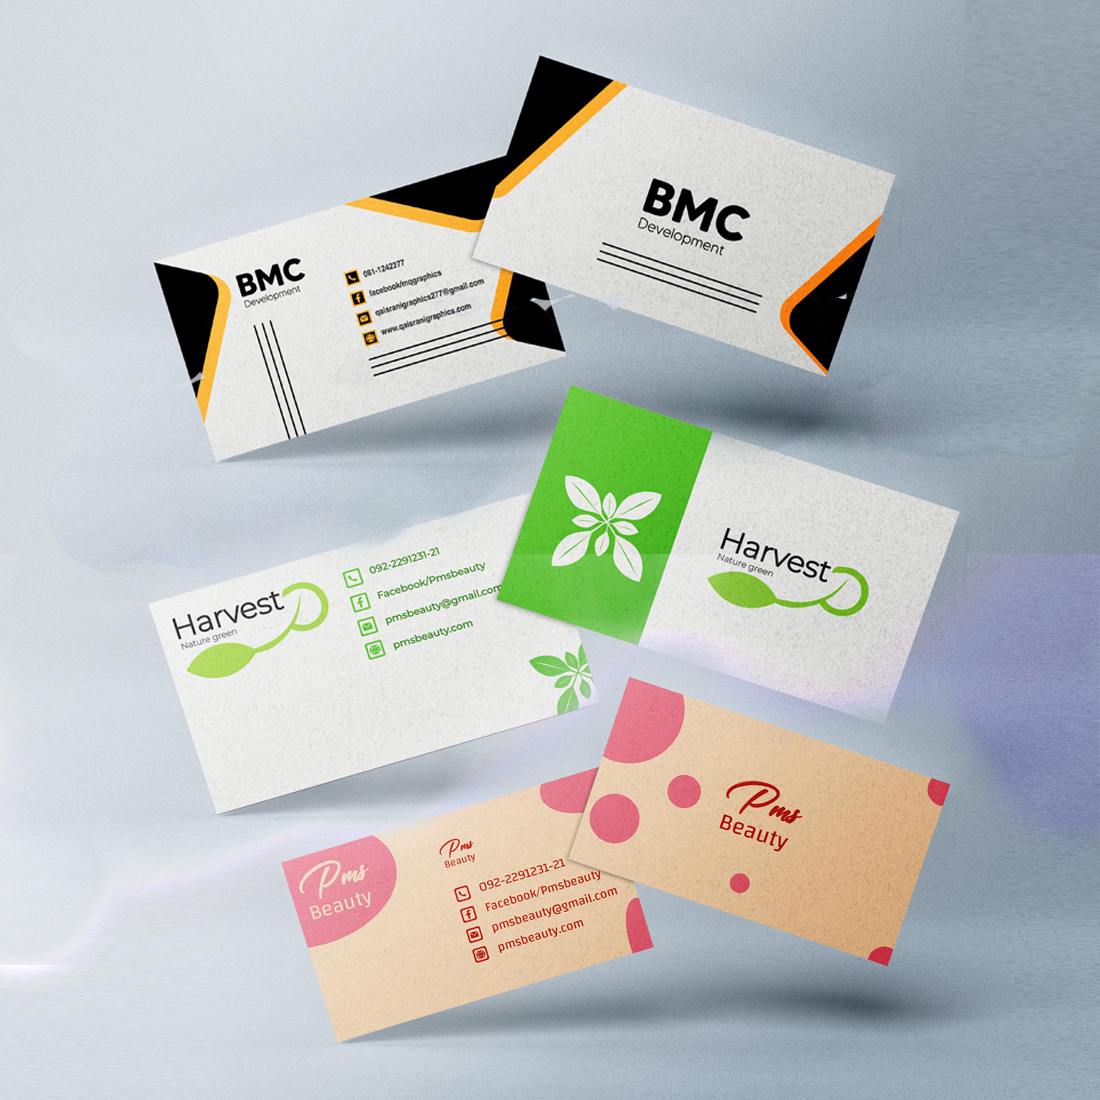 3 Minimalist Business Card Creative Design Pack cover image.